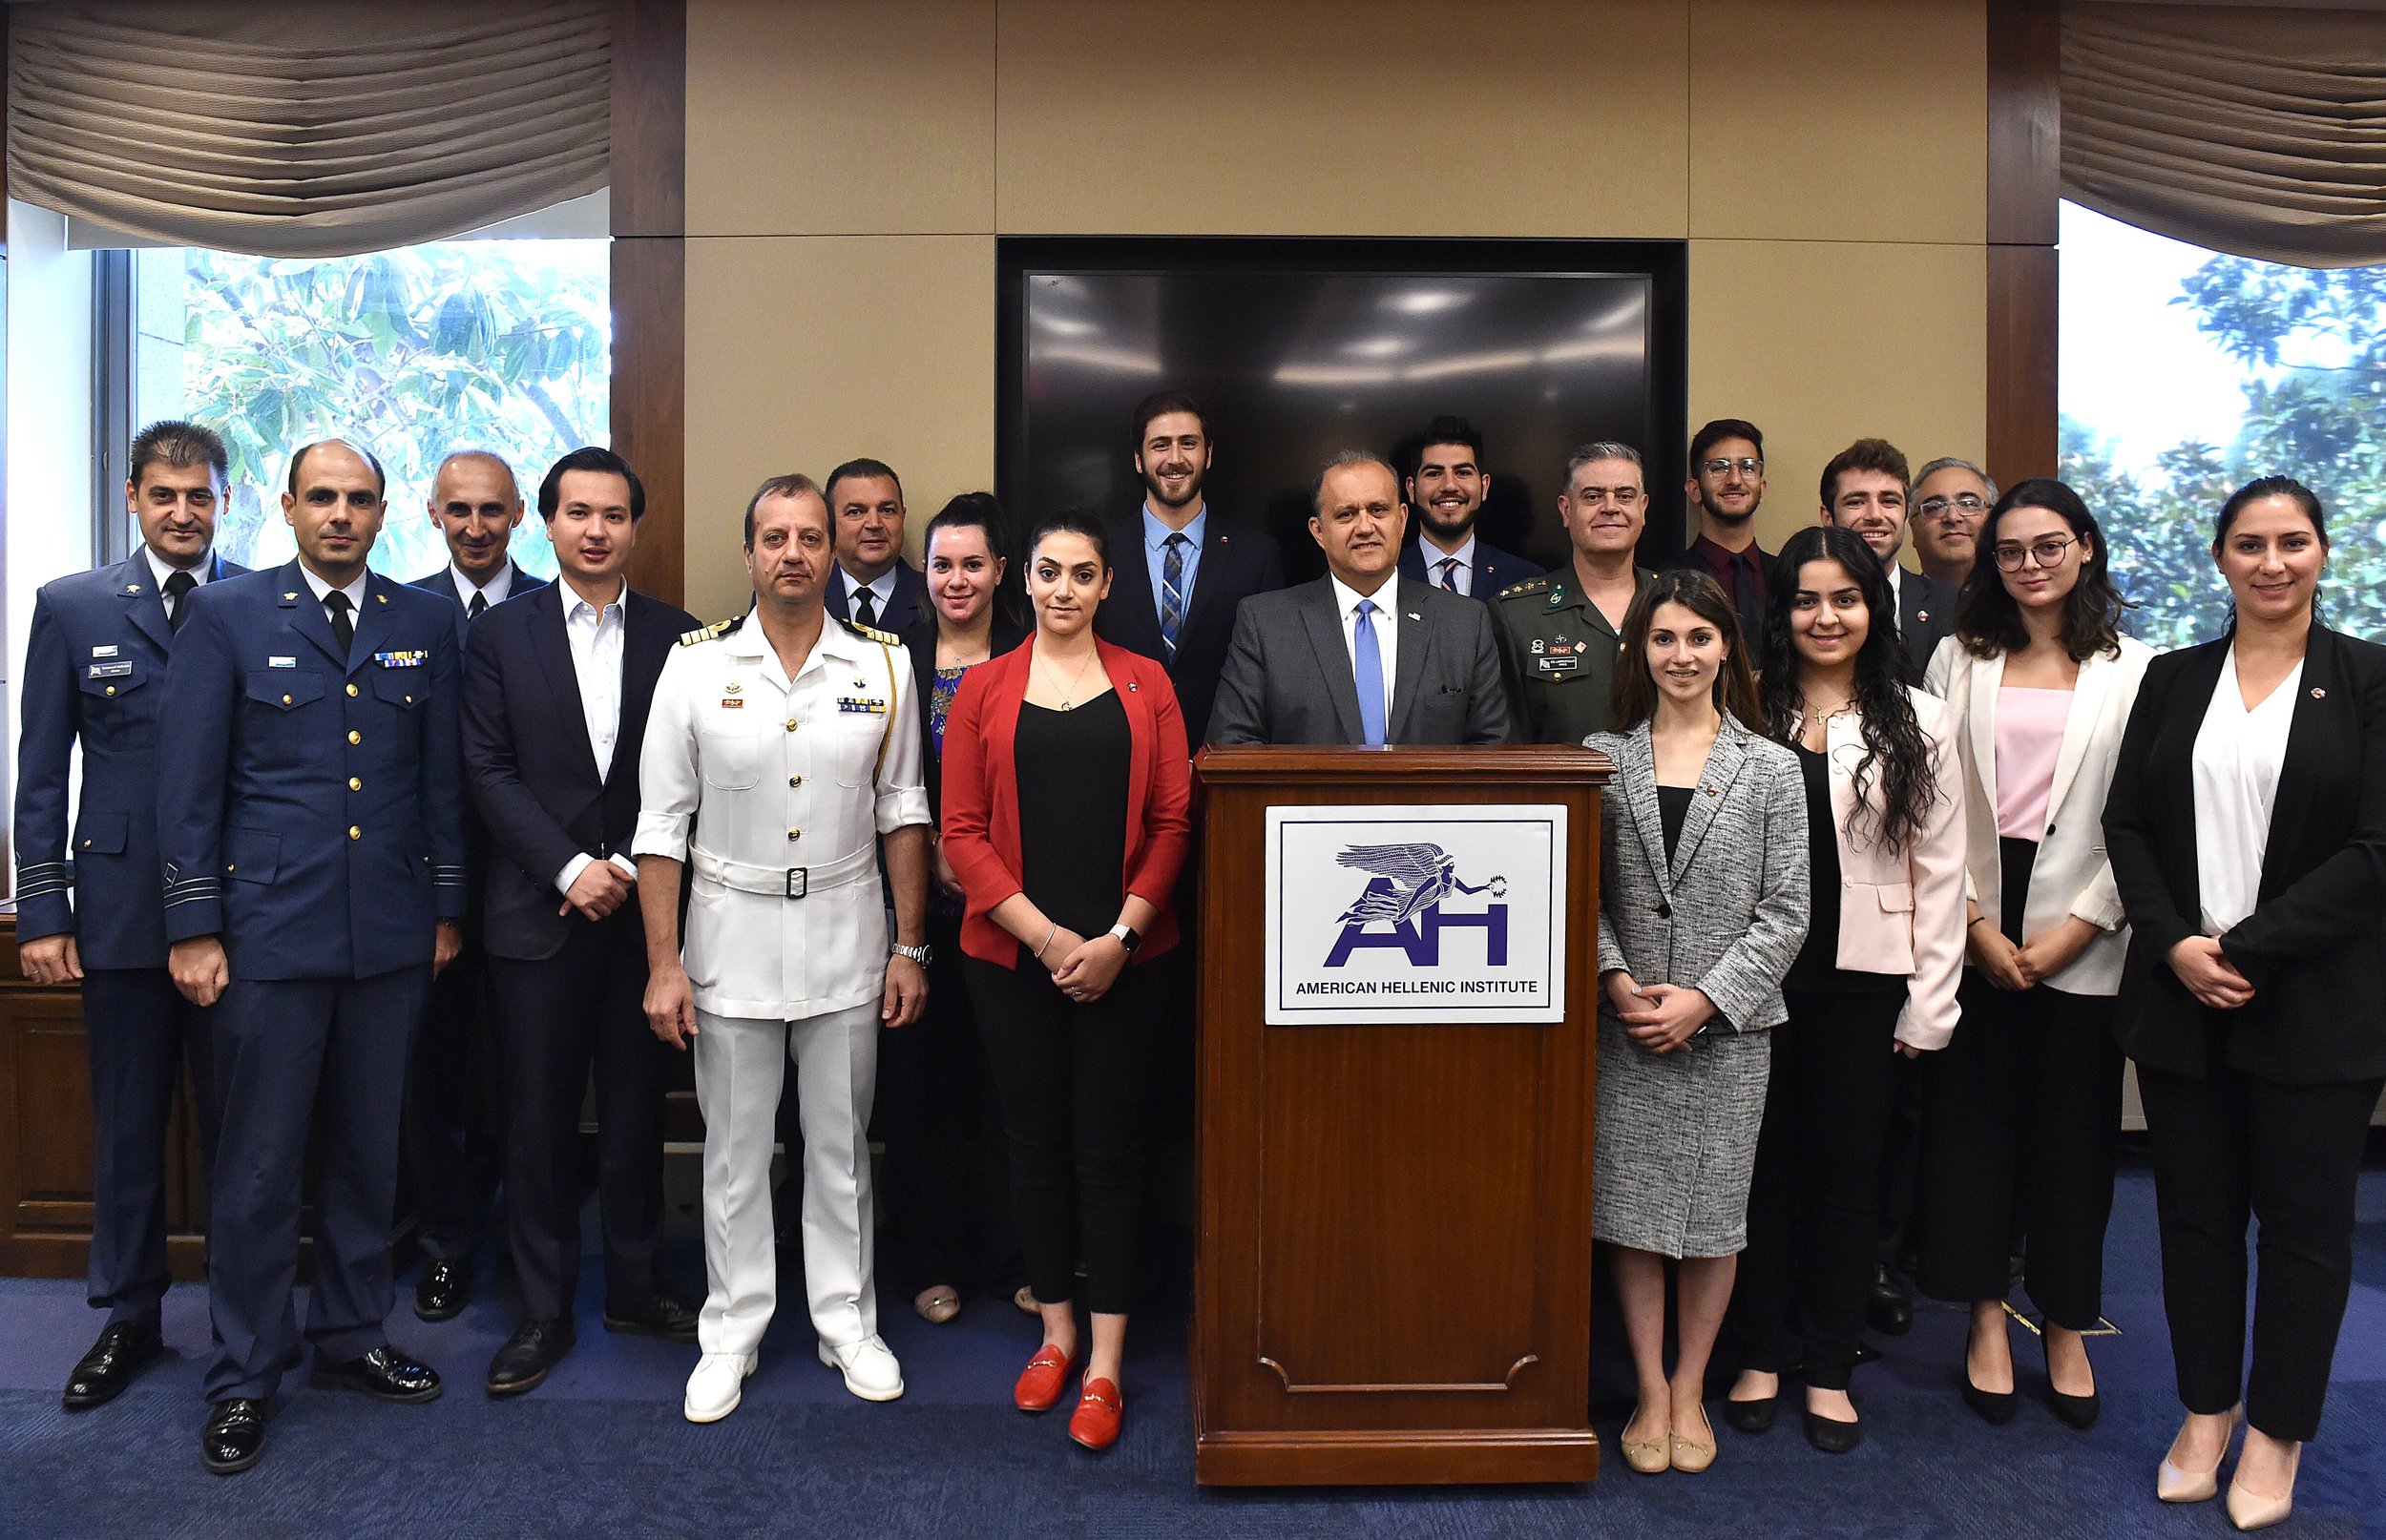  Group photo consisting of Greece’s attaches and various military officials, AHI President Larigakis, Legislative Assistant Gerasoulis, and a delegation from the Armenian National Committee of America (ANCA) 